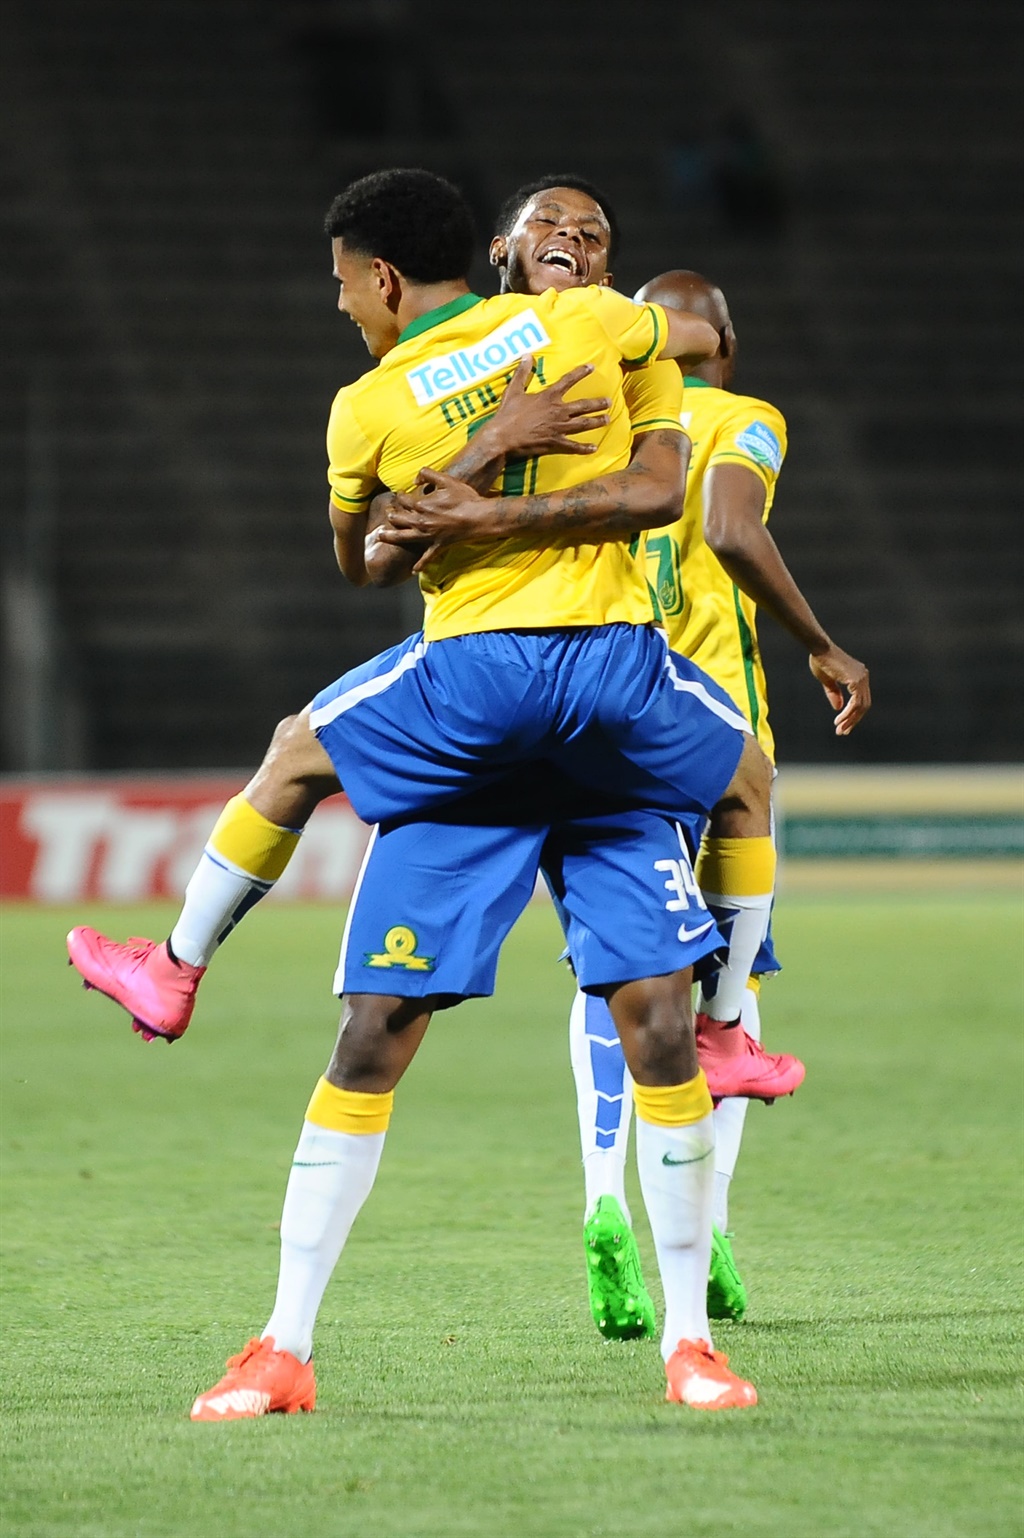 Friends Bongani Zungu and Keagan Dolly to tackle each other